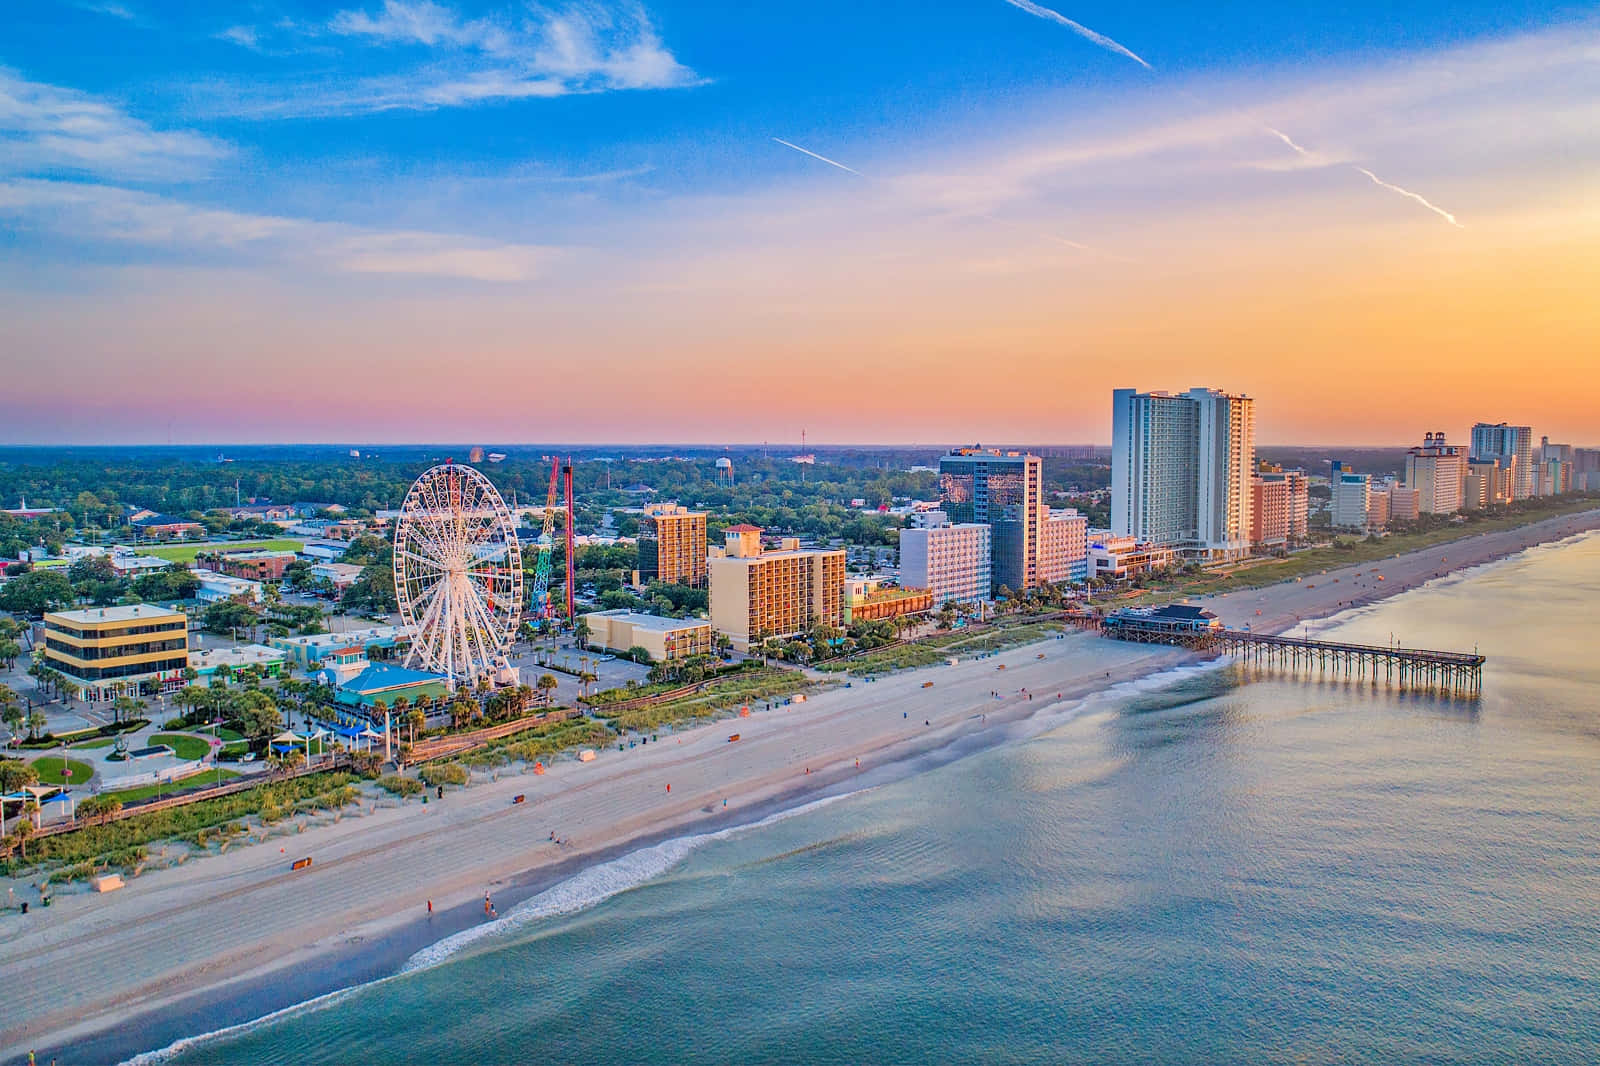 "Experience a Breathtaking Sunset over Myrtle Beach"